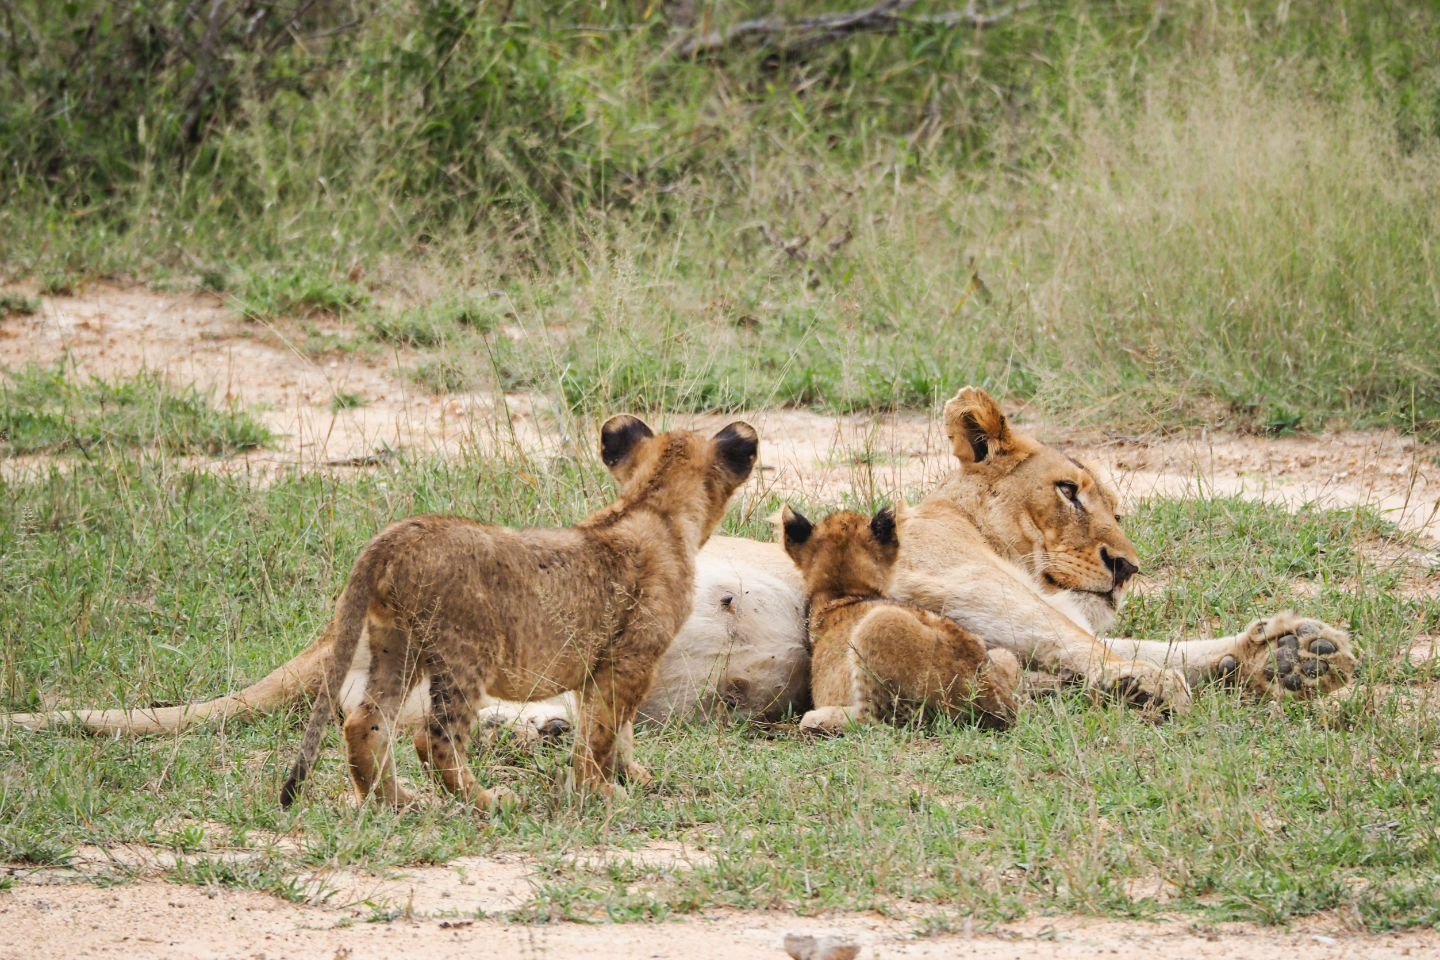 last safari post! we we so lucky to see this sleepy pride of lions on our final game drive.. and adorable bebes too. 😍

i remember the overwhelming desire to stay in this moment and in this place. it was such a a magical experience and i really didn